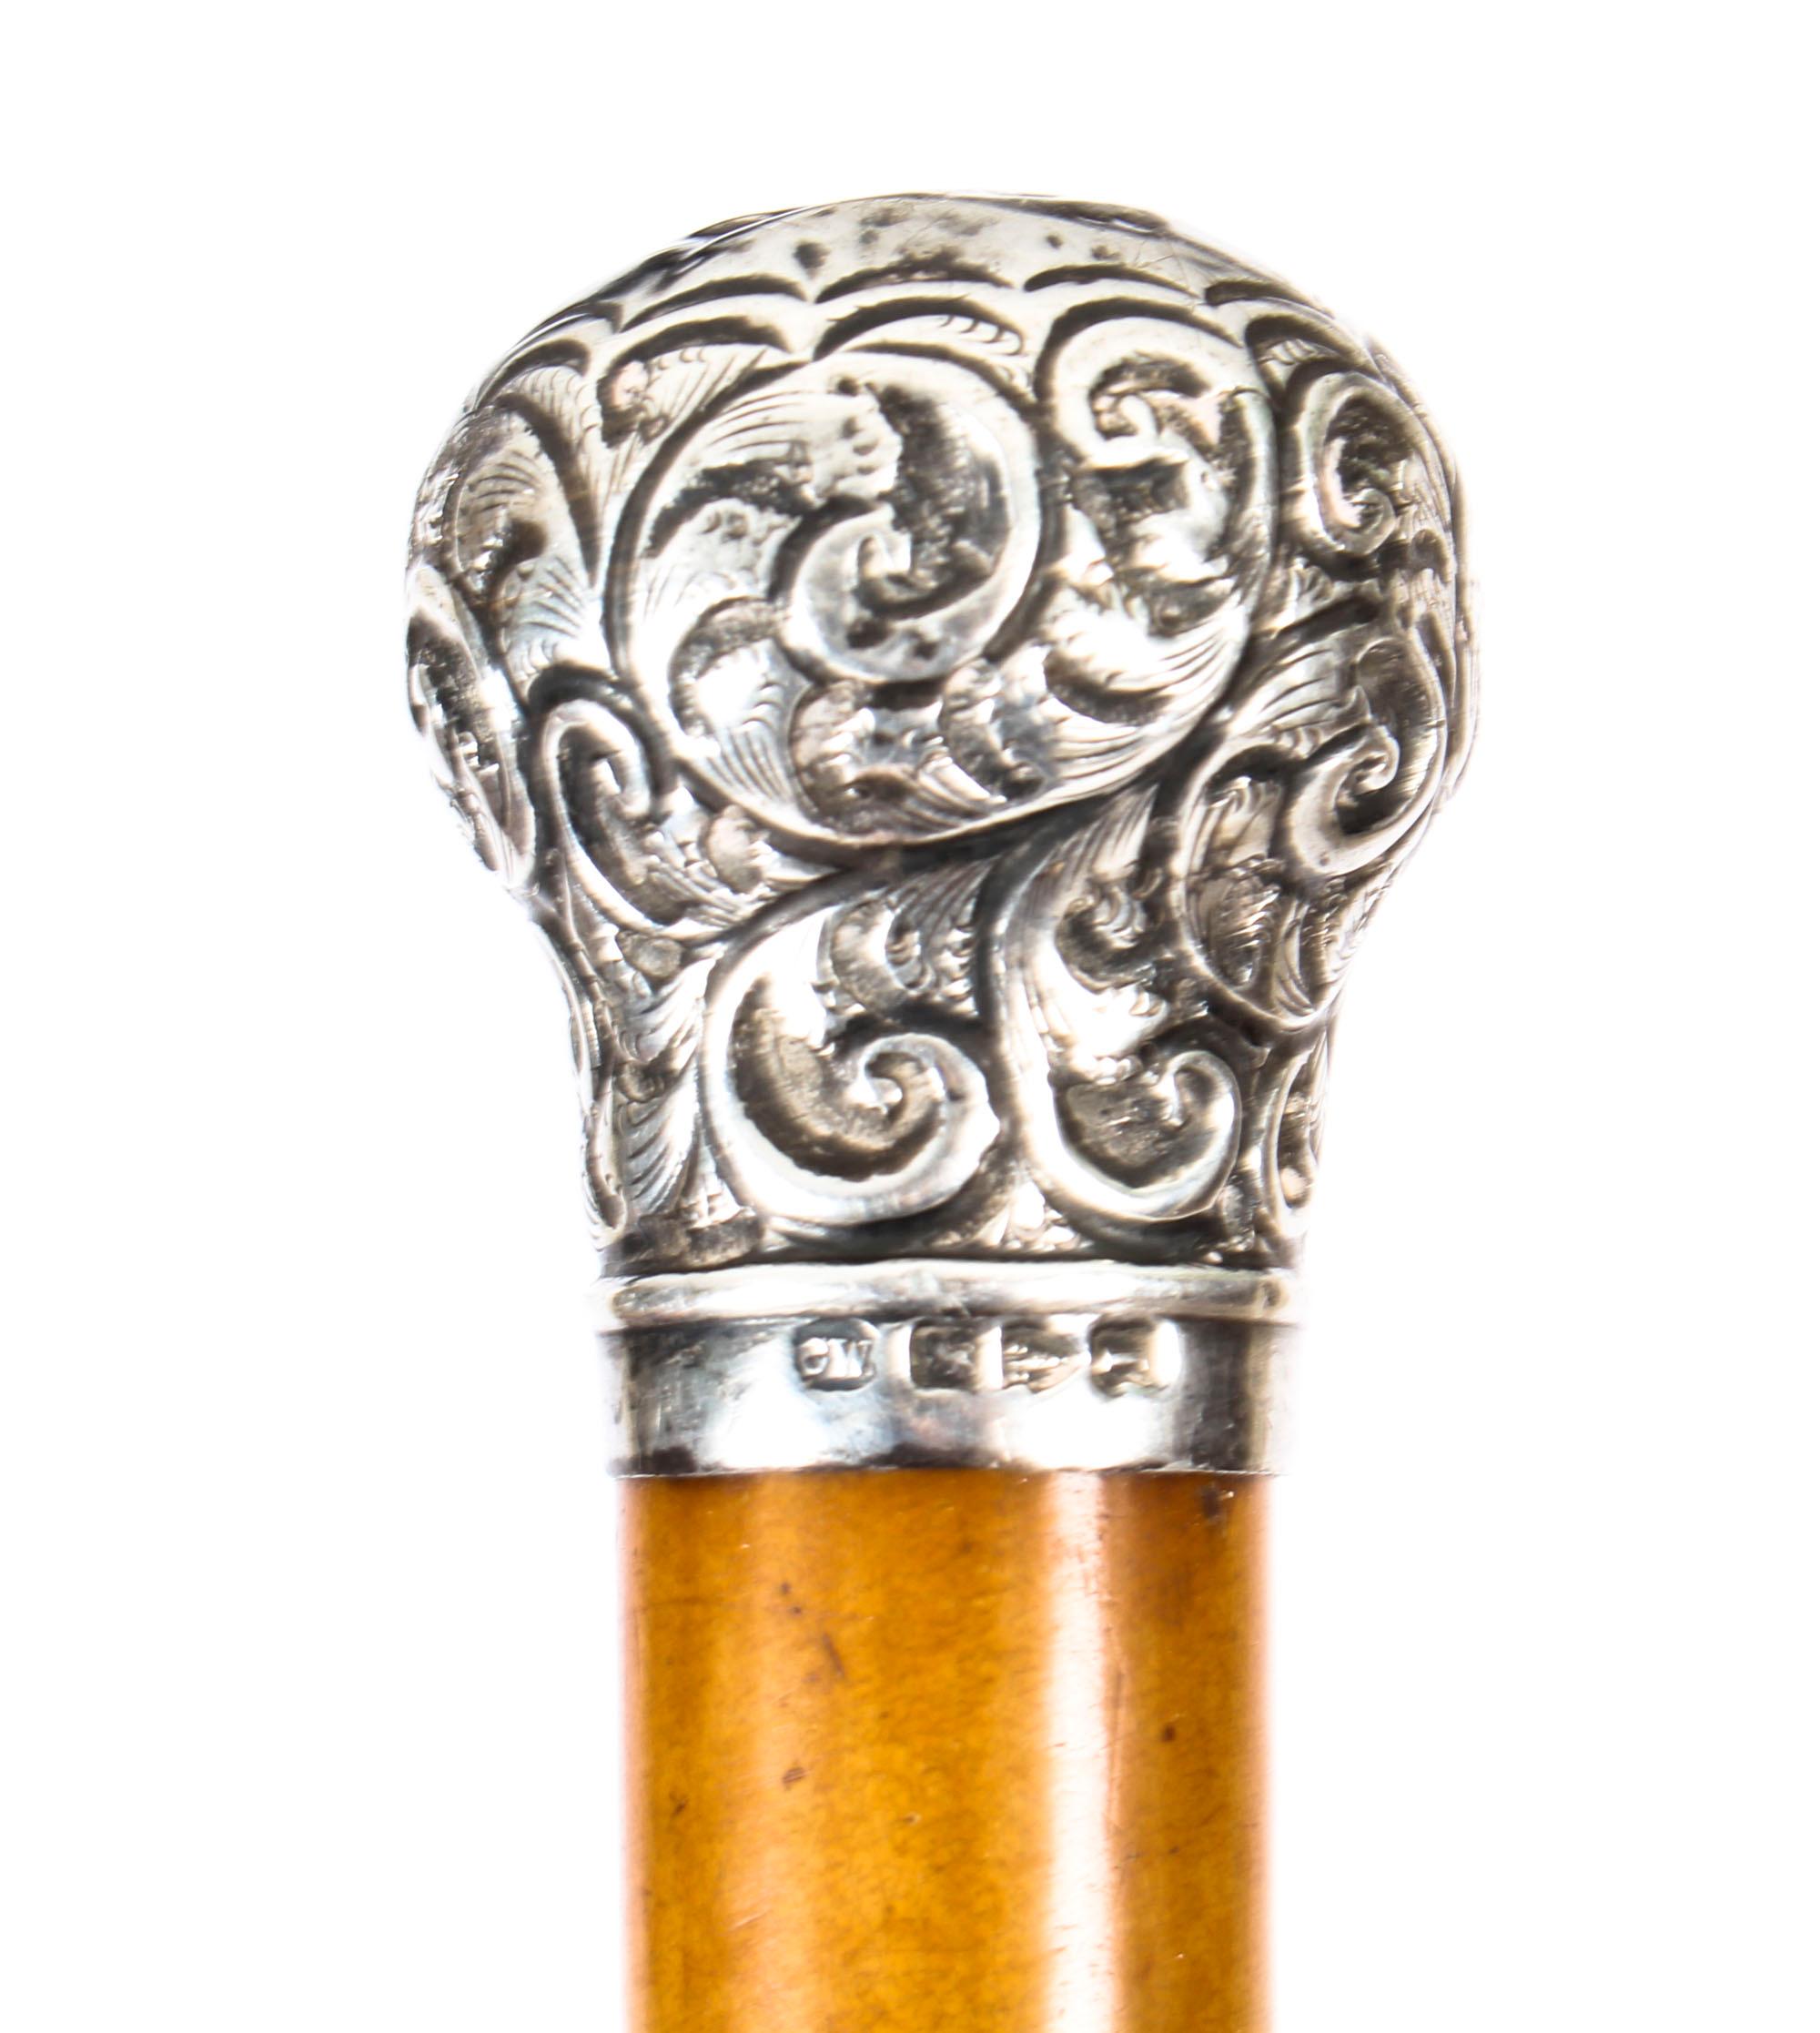 This is a beautiful antique English gentleman's malacca and sterling silver pommel walking / sword stick bearing hallmarks for Chester 1892.
 
The striking stick features an ornate silver pommel embossed with scrolling foliage on a gentle tapering